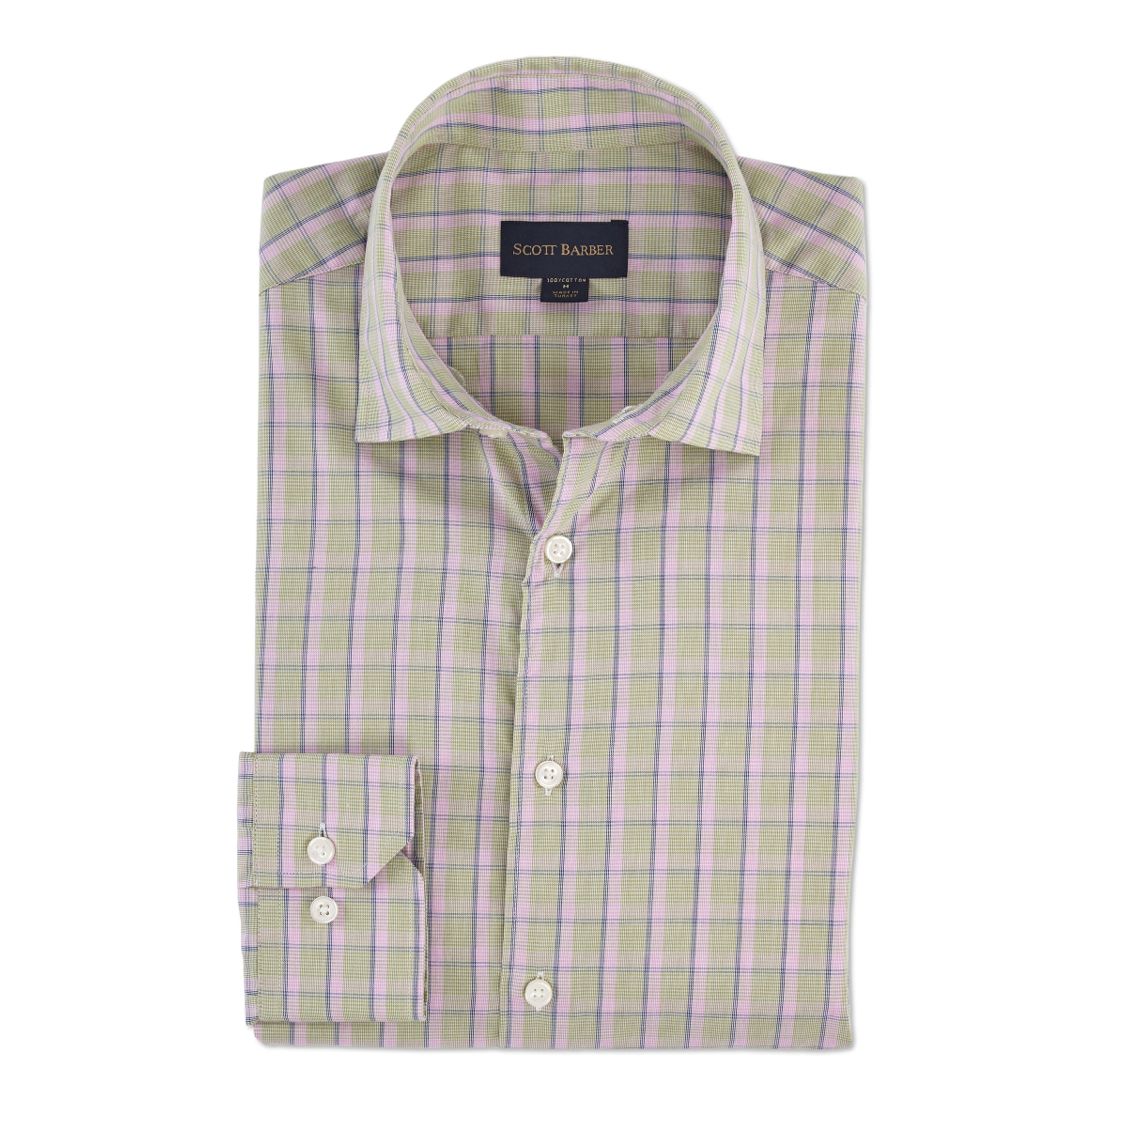 End-On-End Classic Check Sport Shirt in Lime and Lavender by Scott Barber